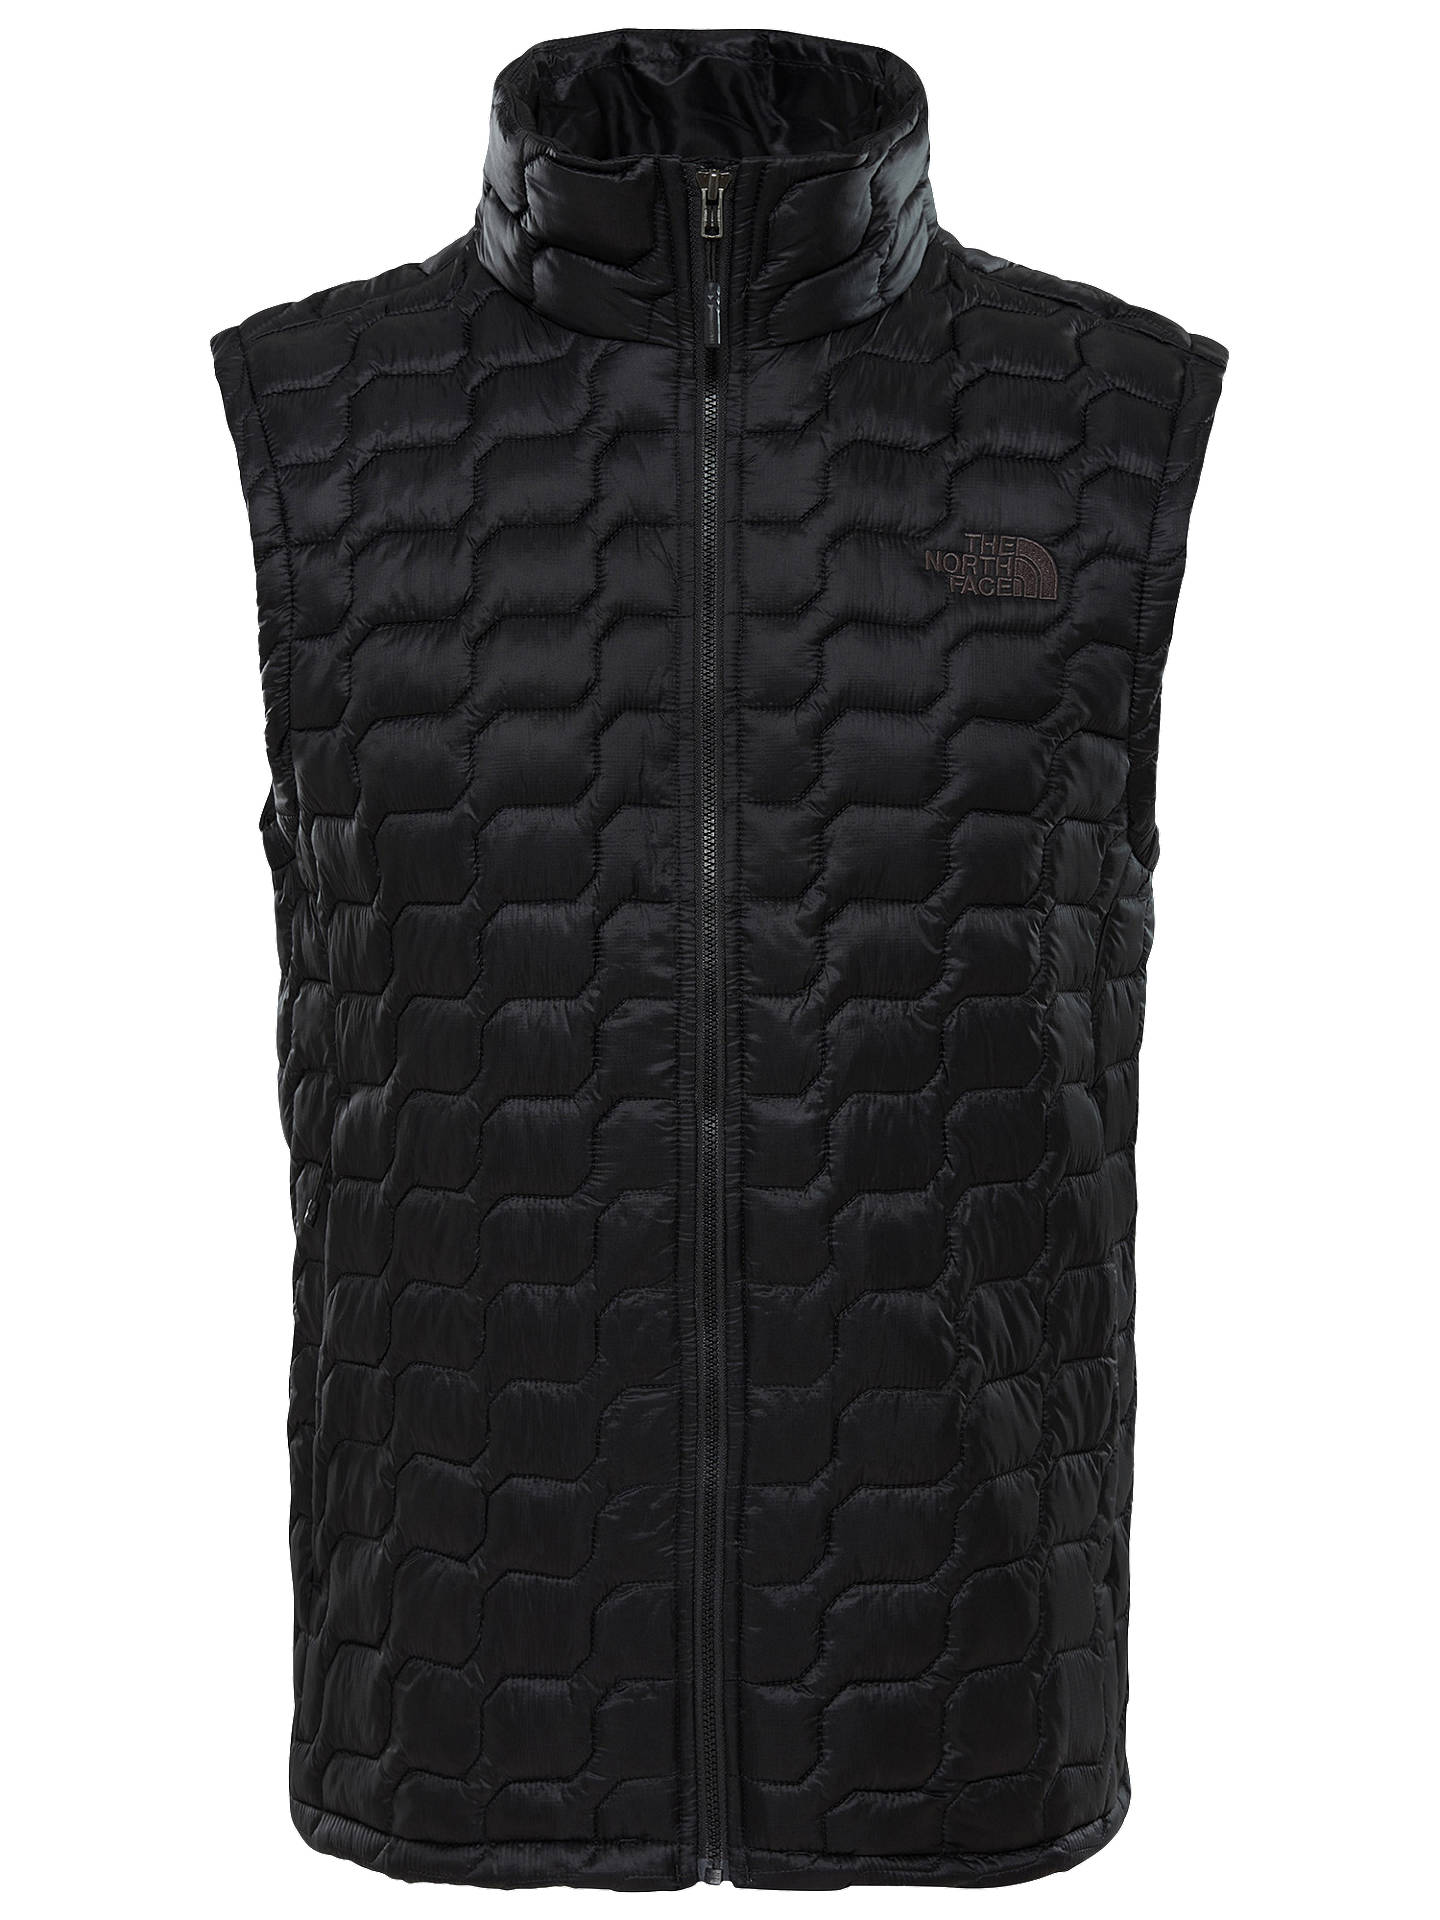 Gilet the north face